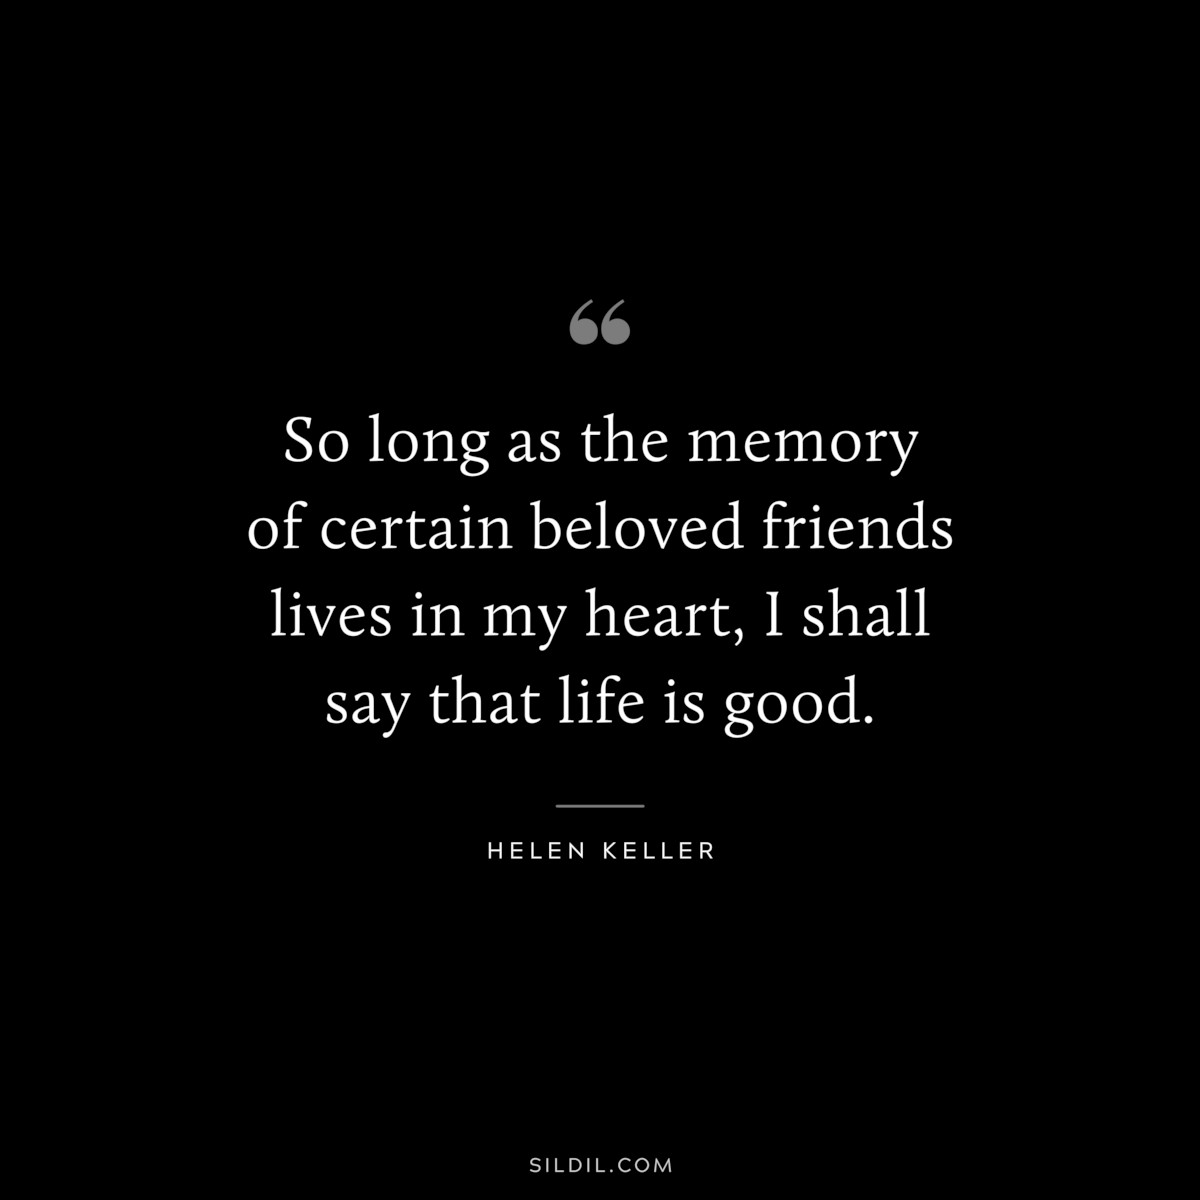 So long as the memory of certain beloved friends lives in my heart, I shall say that life is good. ― Helen Keller